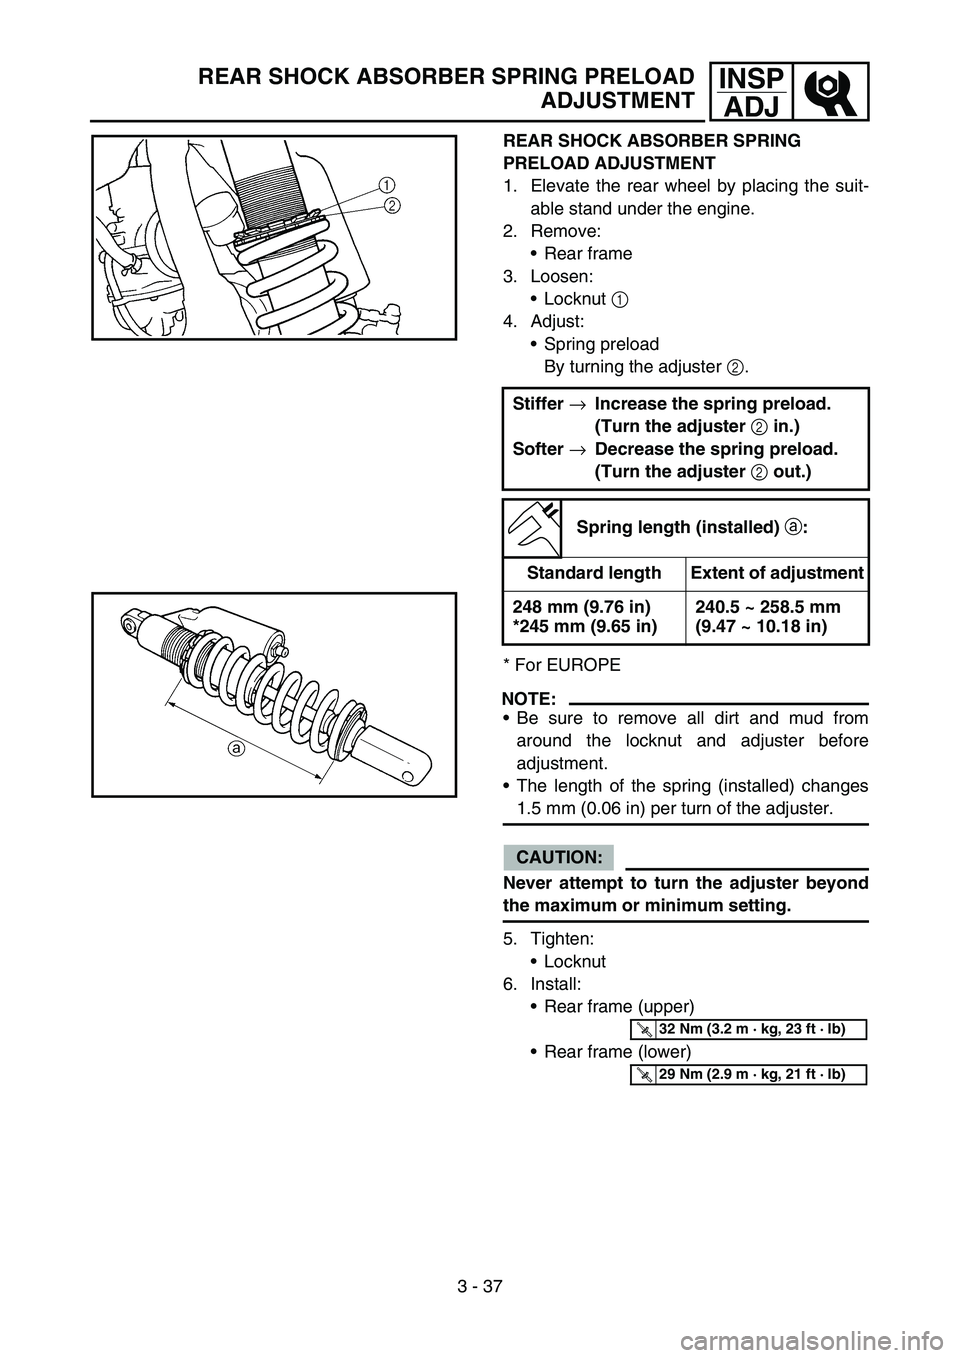 YAMAHA YZ450F 2005  Owners Manual 3 - 37
INSP
ADJREAR SHOCK ABSORBER SPRING PRELOAD
ADJUSTMENT
REAR SHOCK ABSORBER SPRING 
PRELOAD ADJUSTMENT
1. Elevate the rear wheel by placing the suit-
able stand under the engine.
2. Remove:
Rear